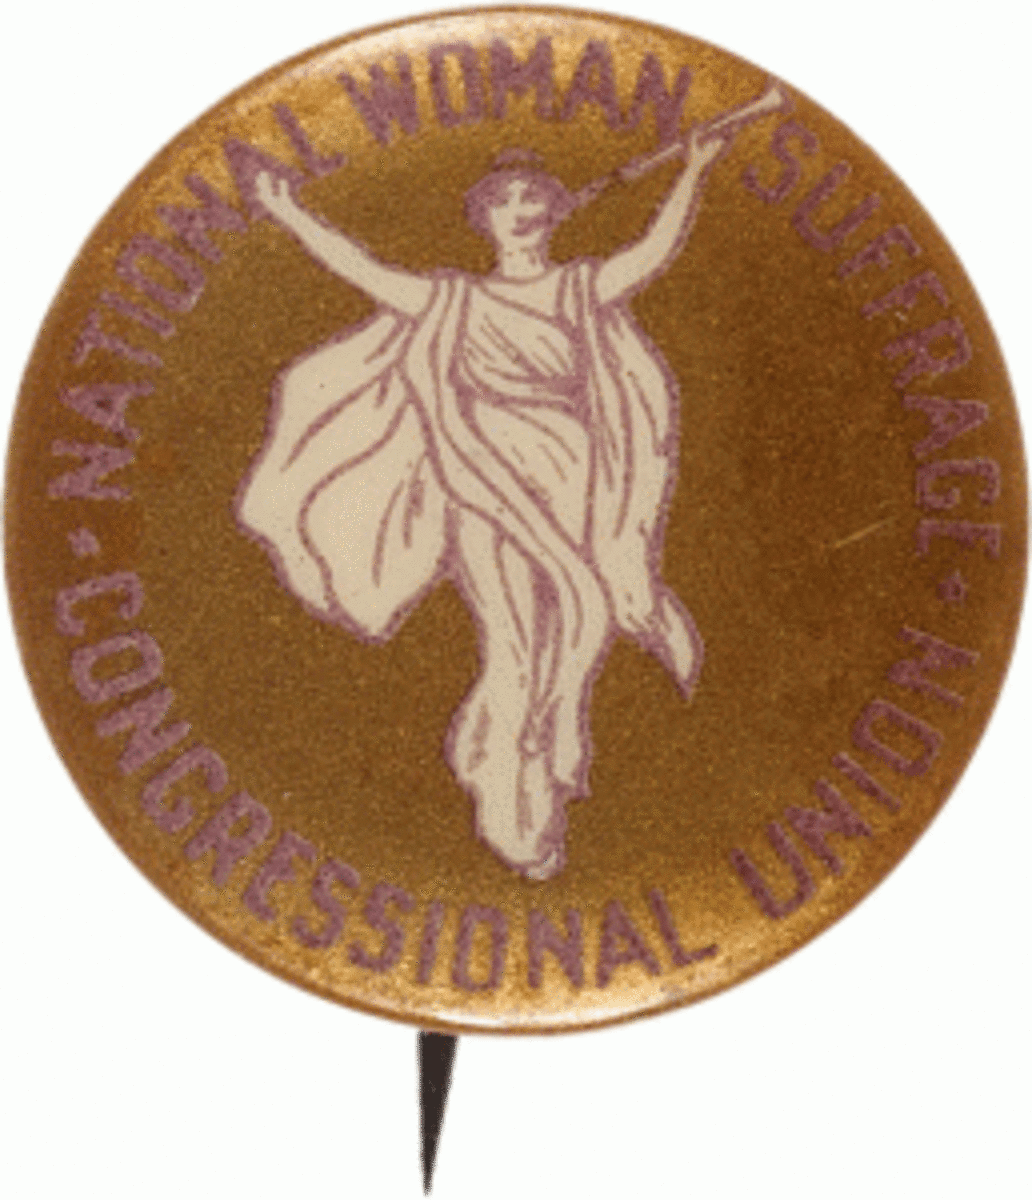 Women’s suffrage button, inscribed with “National Woman Suffrage Congressional Union” fetched $687.50 at auction in July 2014. (Photo courtesy Heritage Auctions)